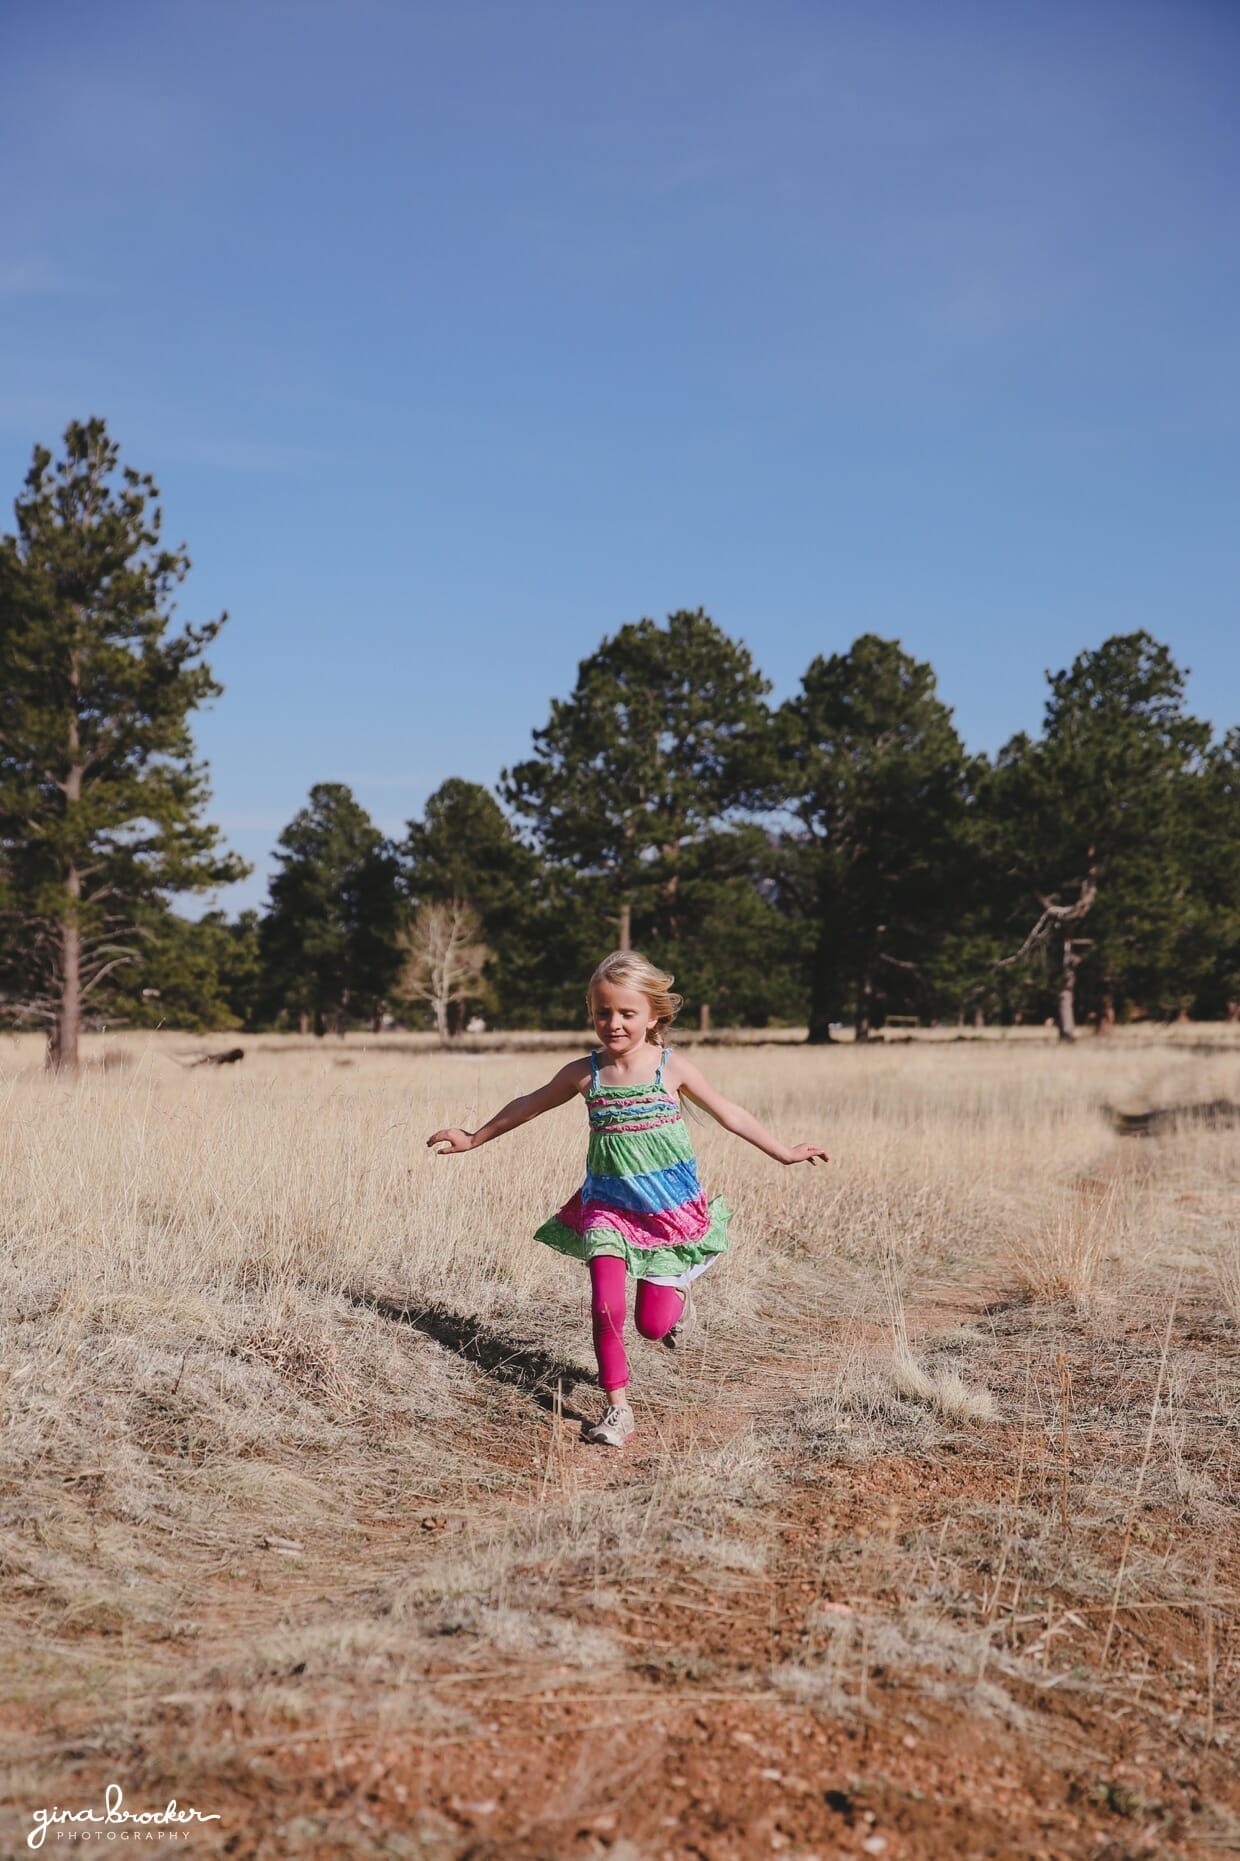 A little girl runs through a field during an outdoor family photo session